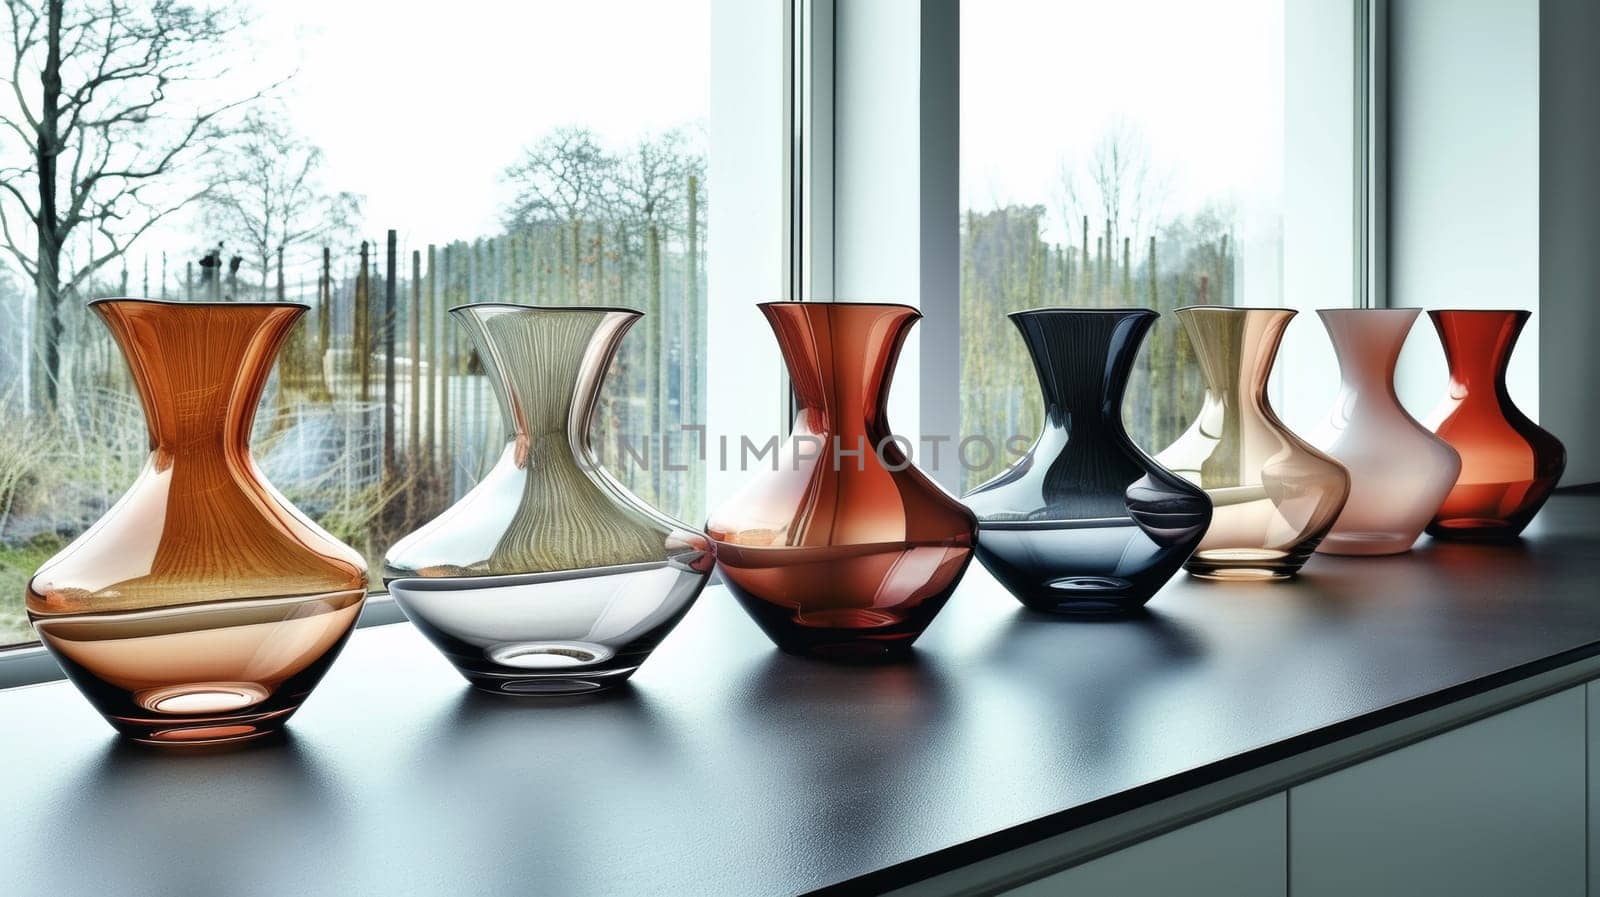 A row of vases lined up on a counter by the window, AI by starush